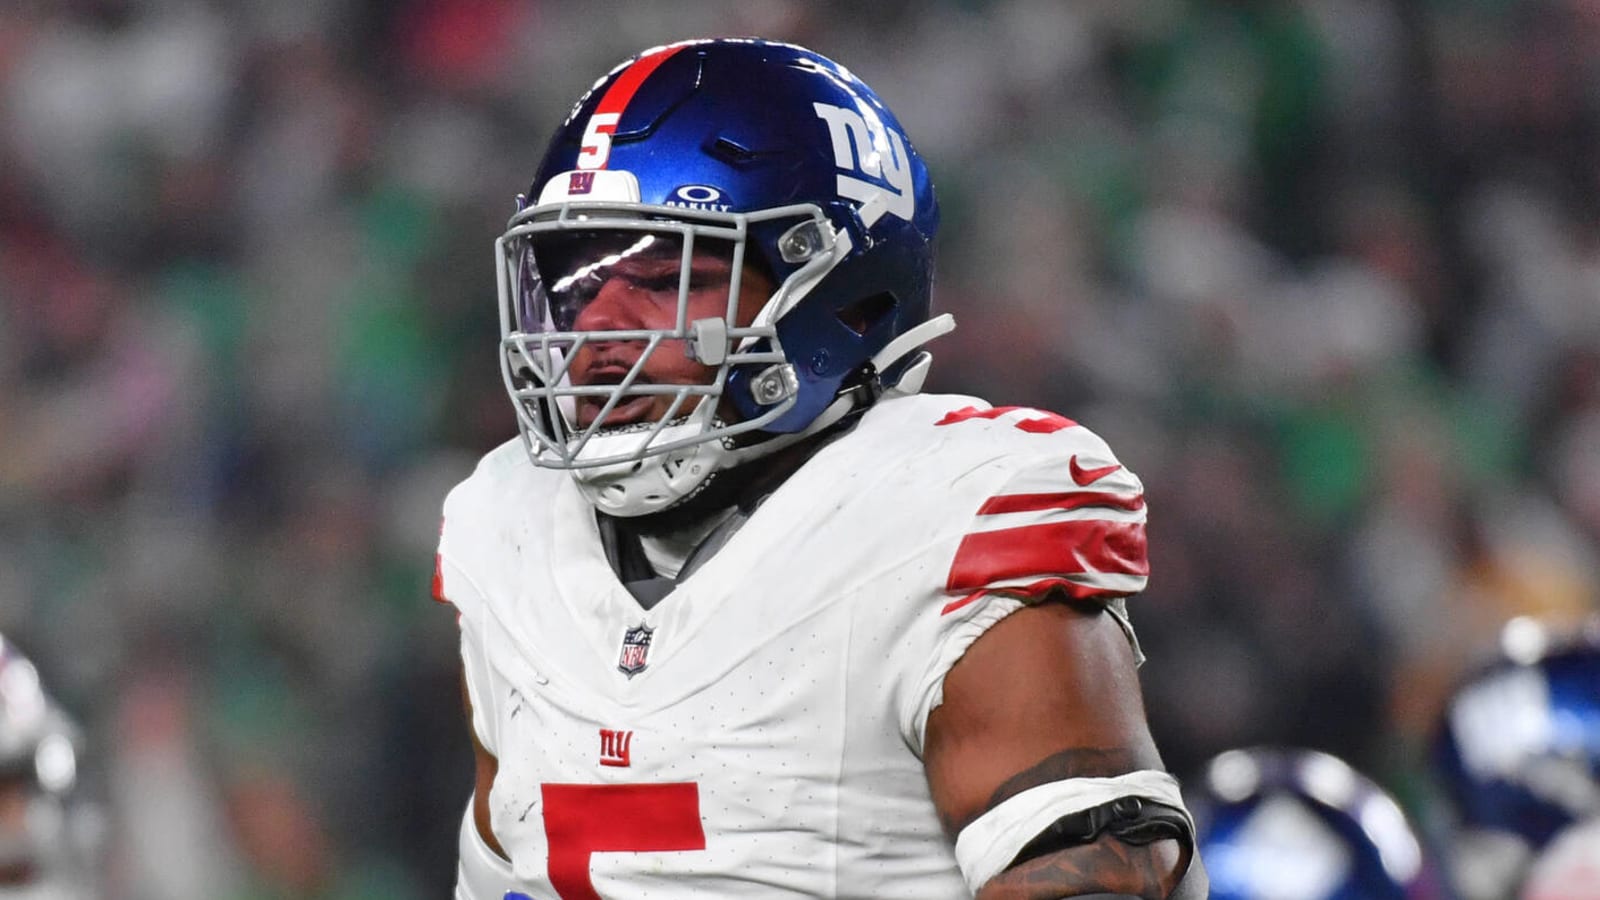 The Giants have something special developing in the defensive trenches